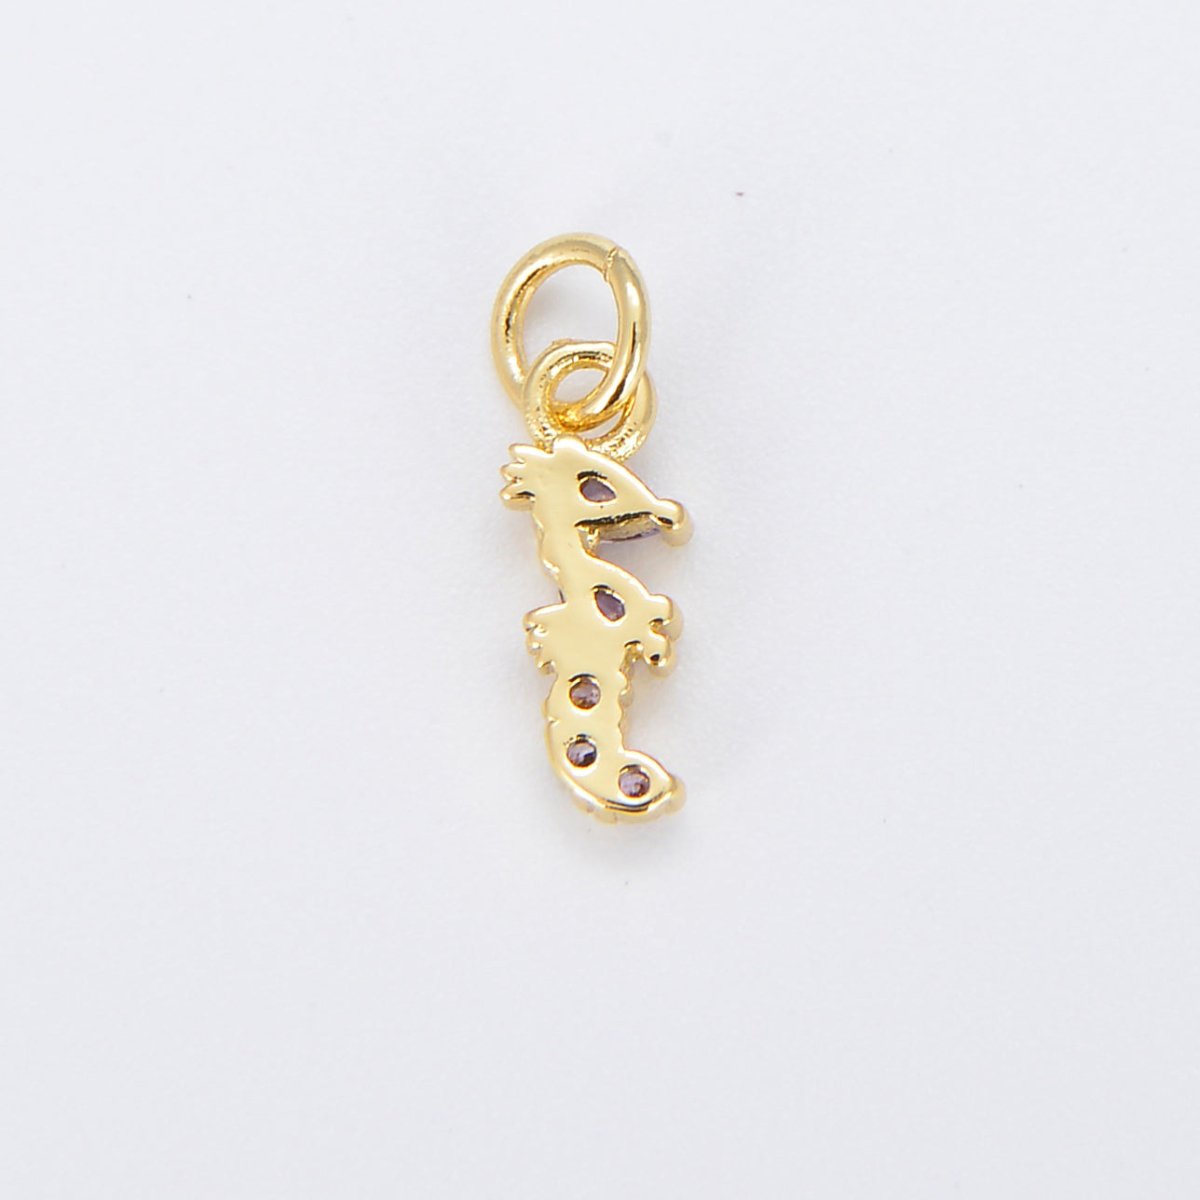 Tiny Sea Horse Charm Dainty Seahorse Pendant 14kt Gold Filled Charm Animal Charm Cubic Purple Under the sea Inspired E-876 - DLUXCA